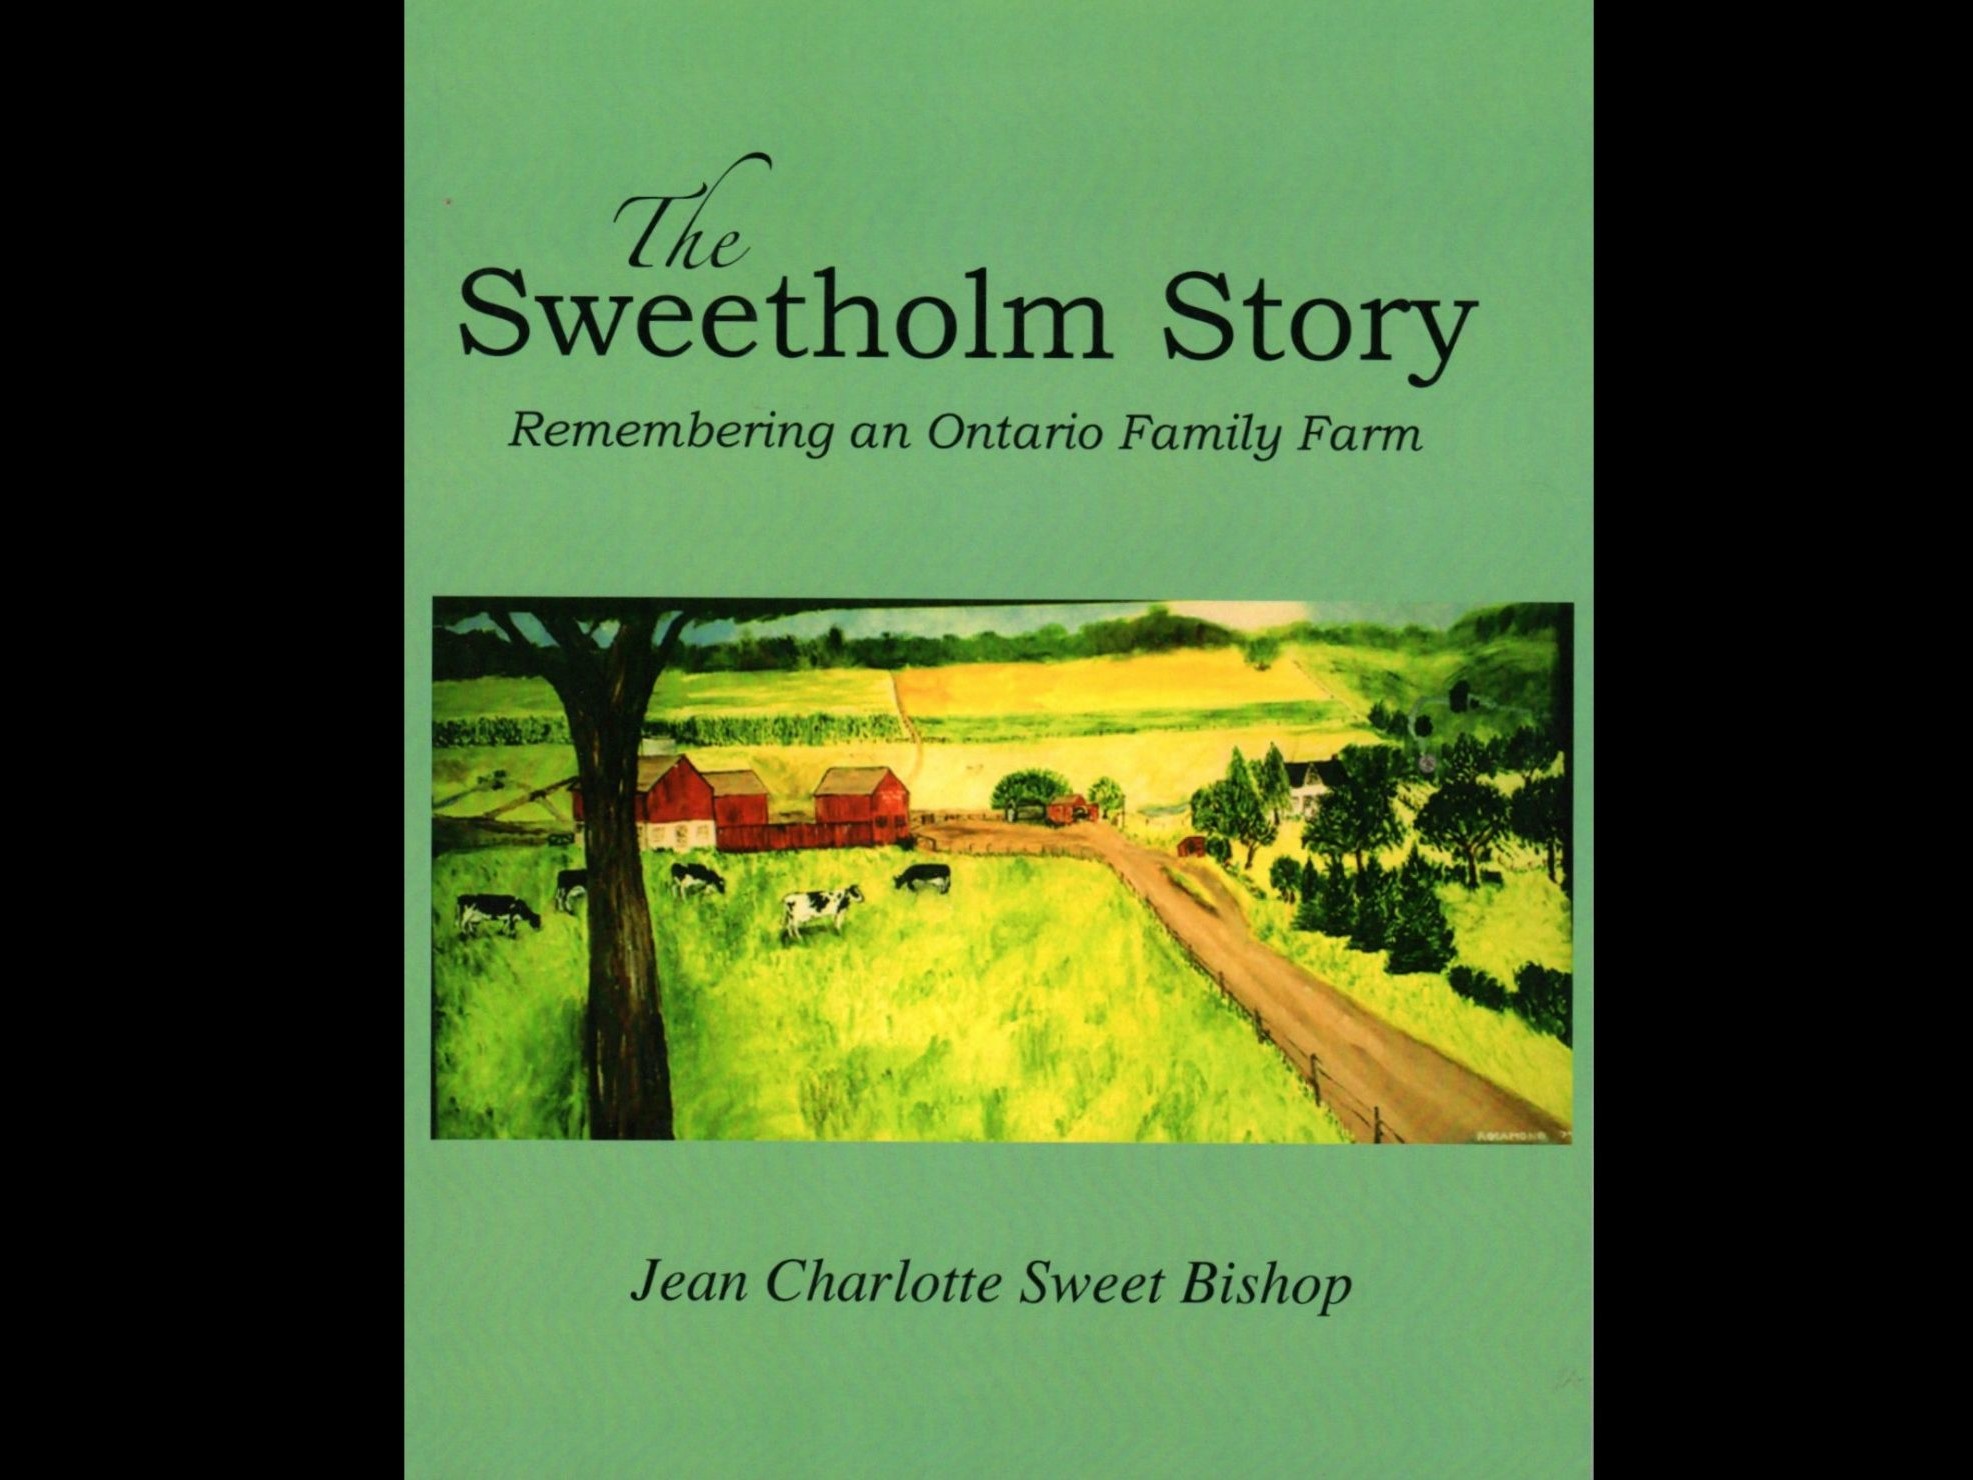 The Sweetholm Story: Remembering an Ontario Family Farm by Jean Charlotte Sweet Bishop. Cover features the painting "Sweetholm" by artist Dorothy "Rusty" Beck (Sweet).